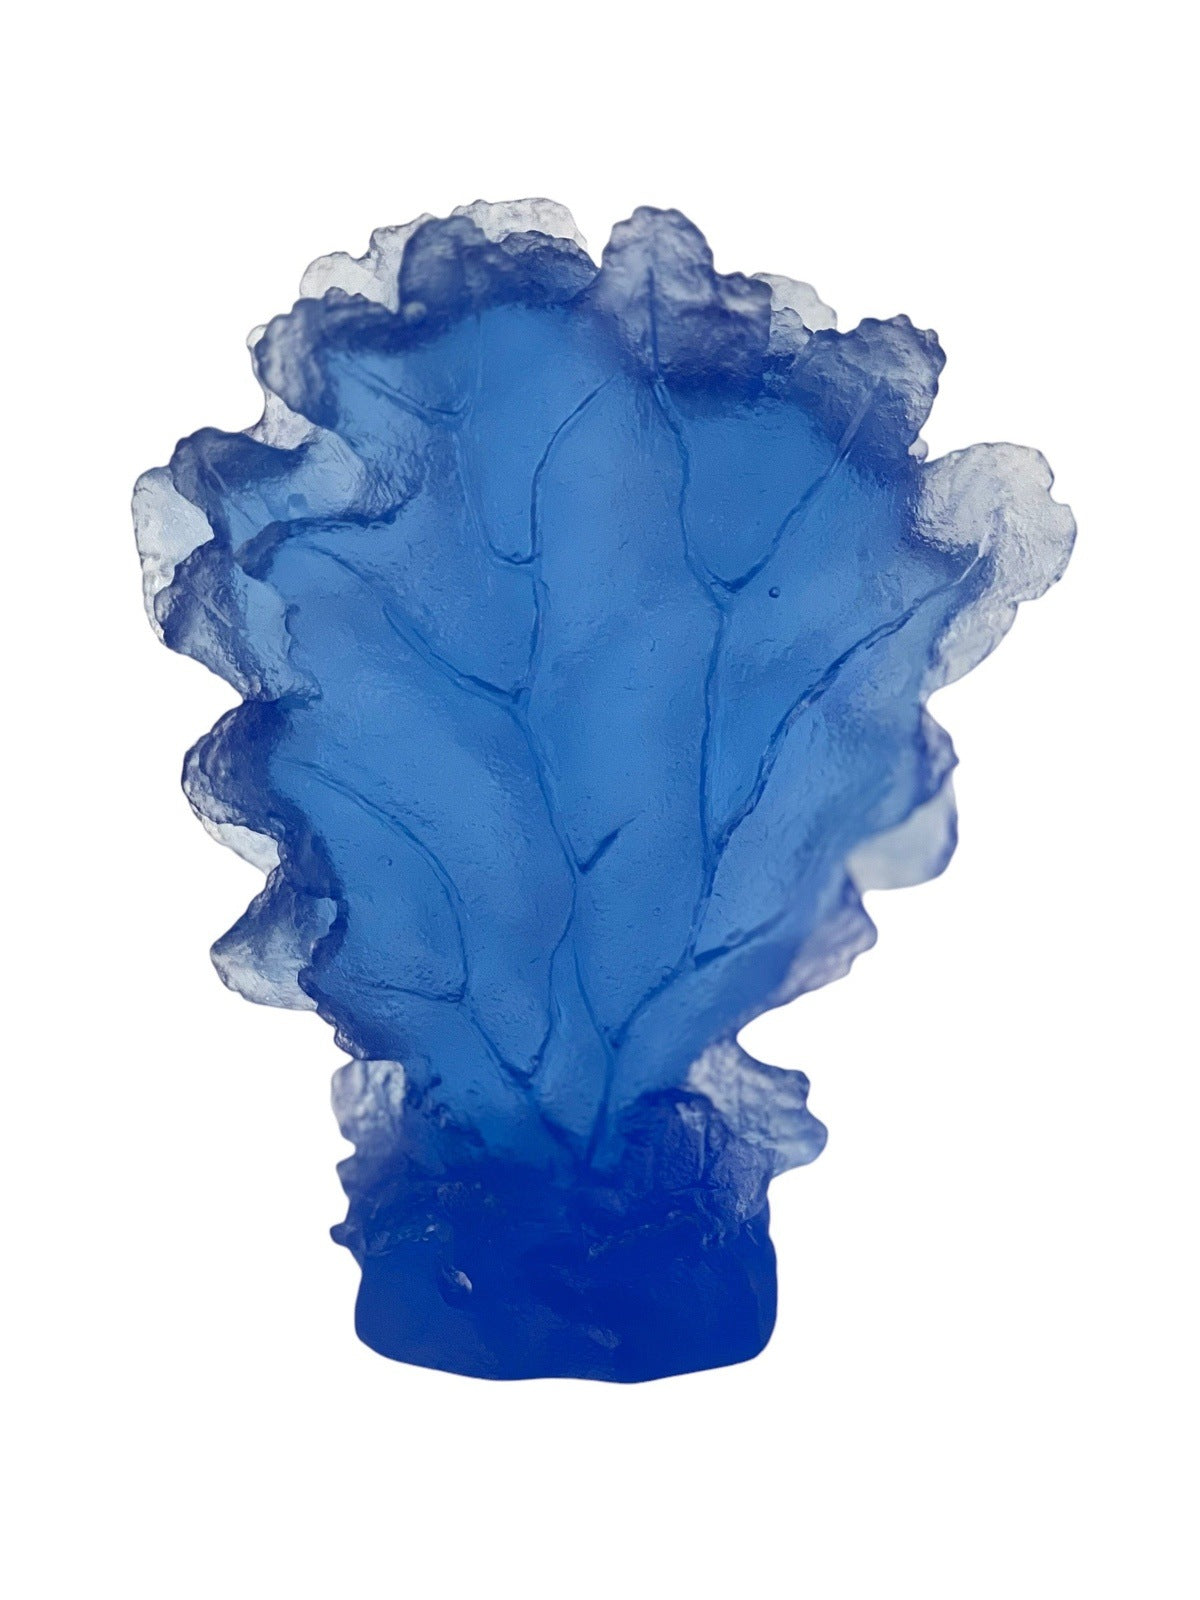 Coral Premium Glass Sculpture  Ionic Blue on white background